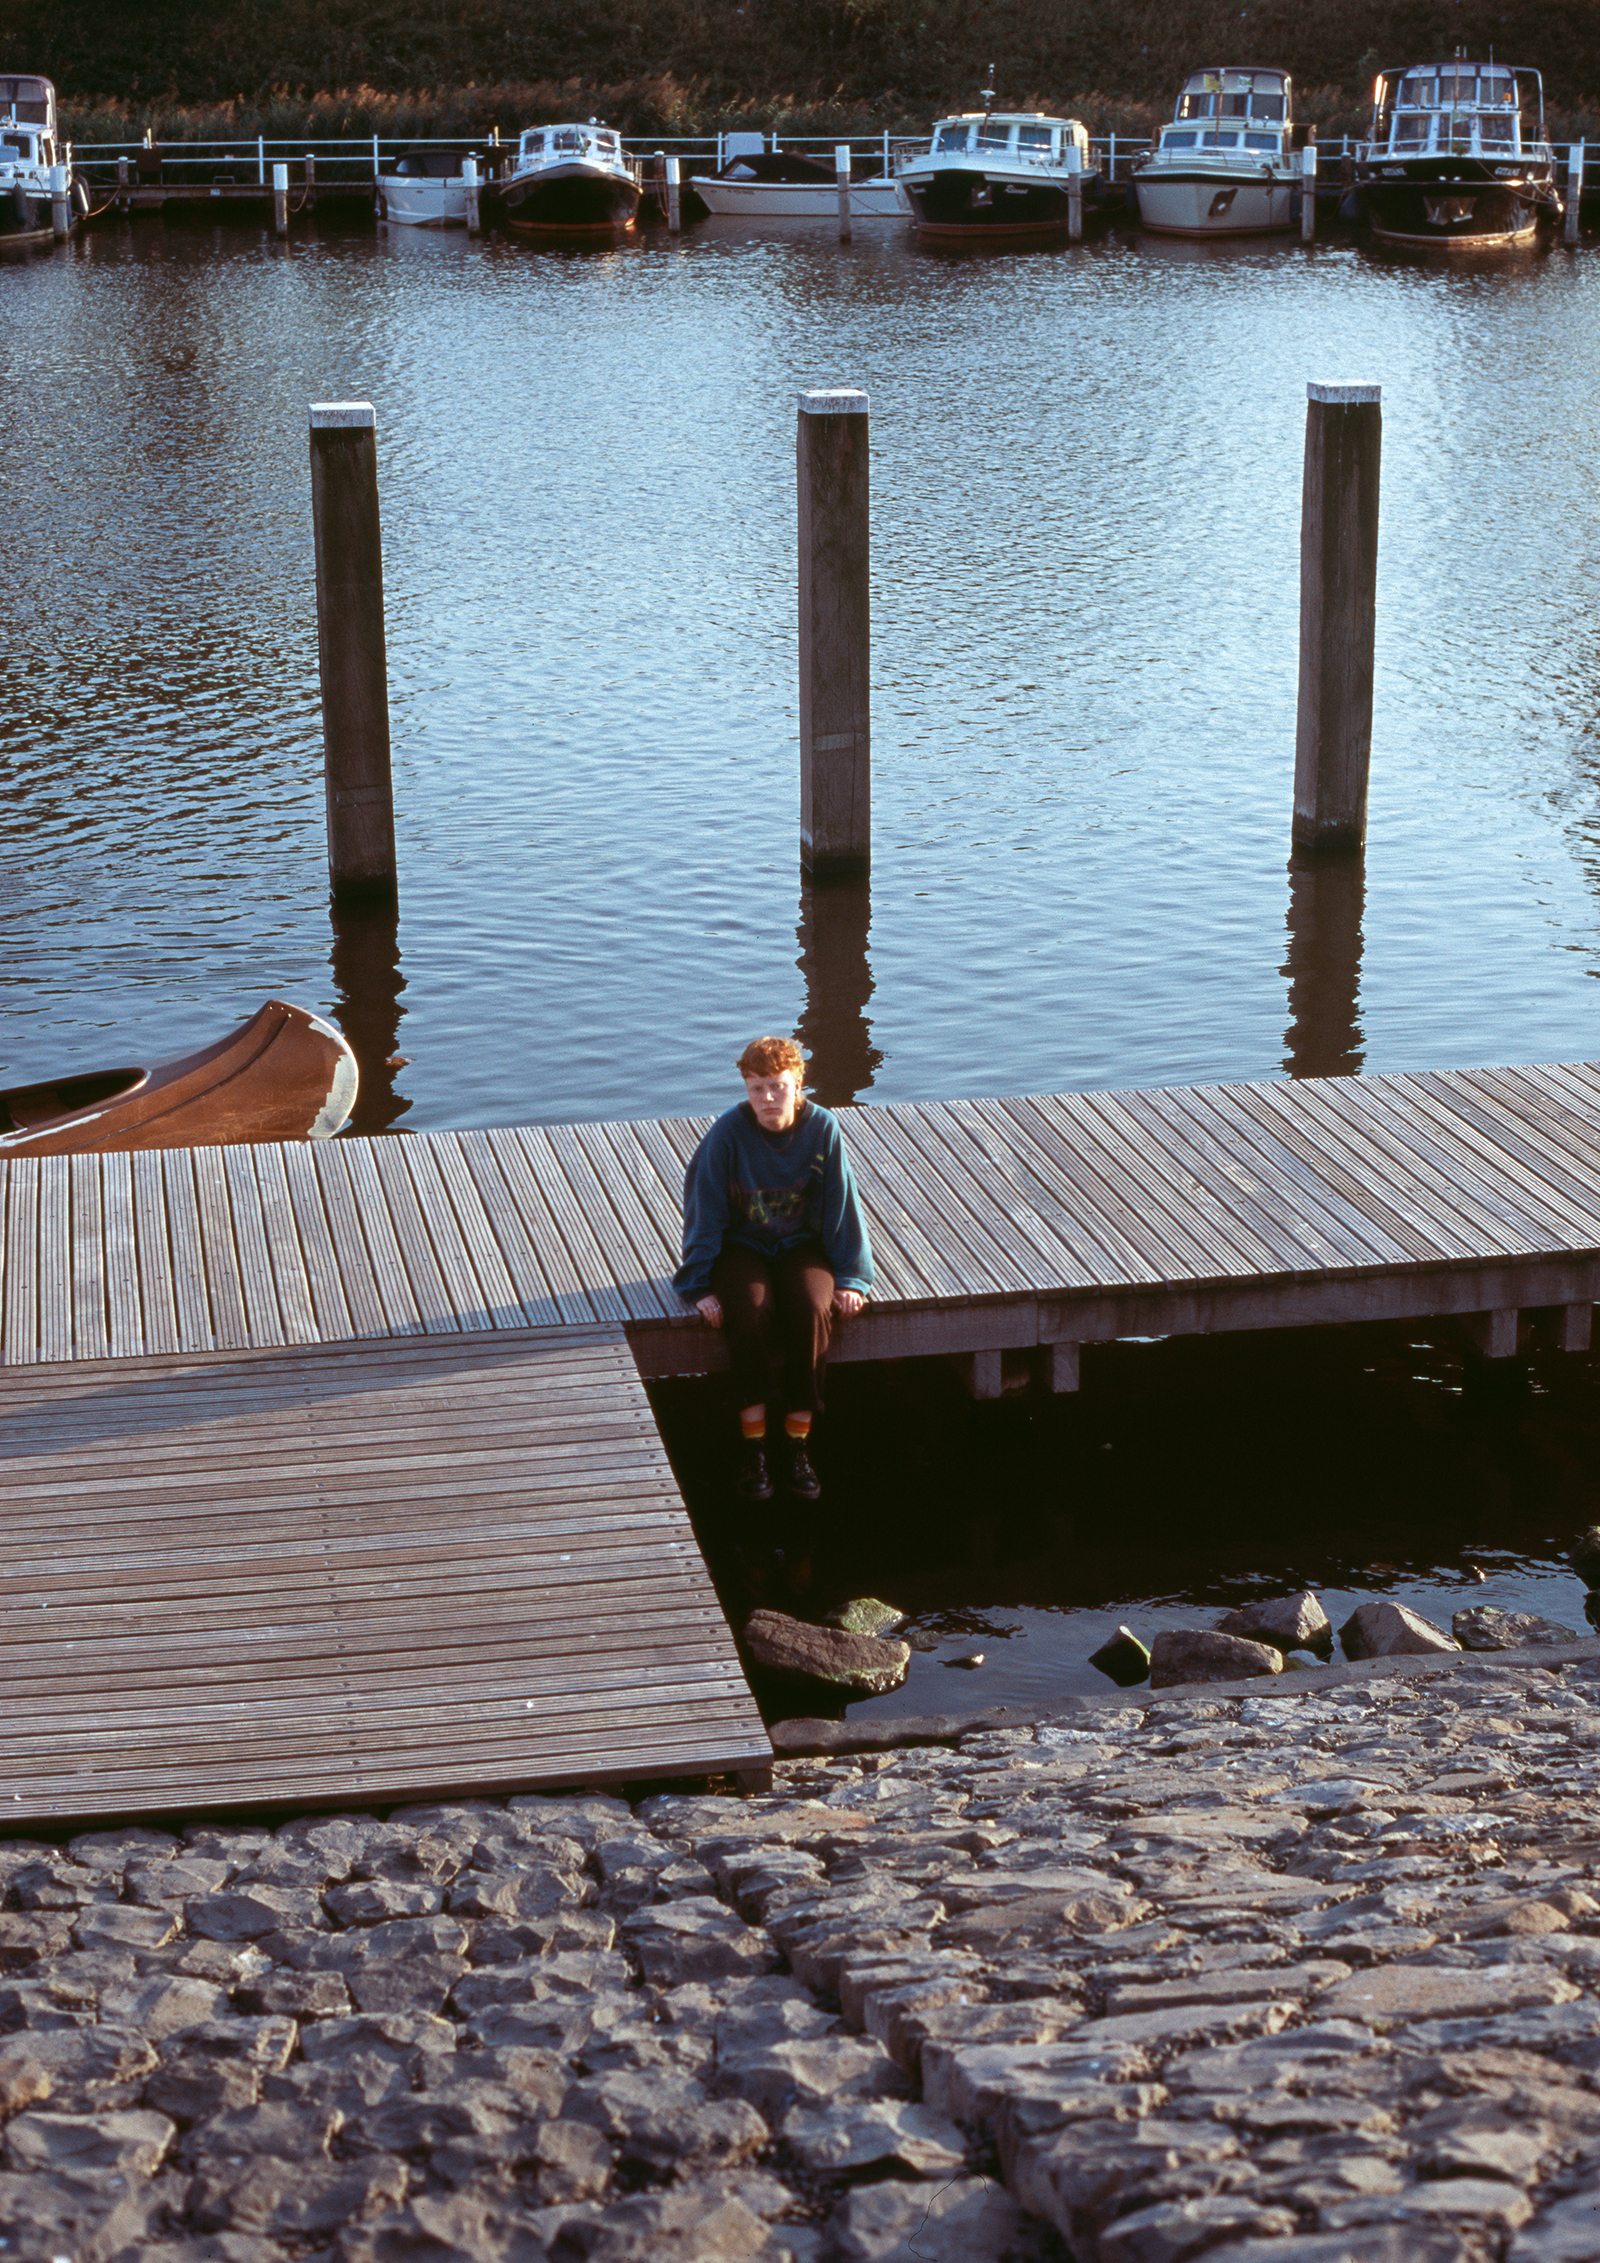 Flo Verhulst – young person sitting on a pier looking sadly to the ground. In the background: water and a few boats